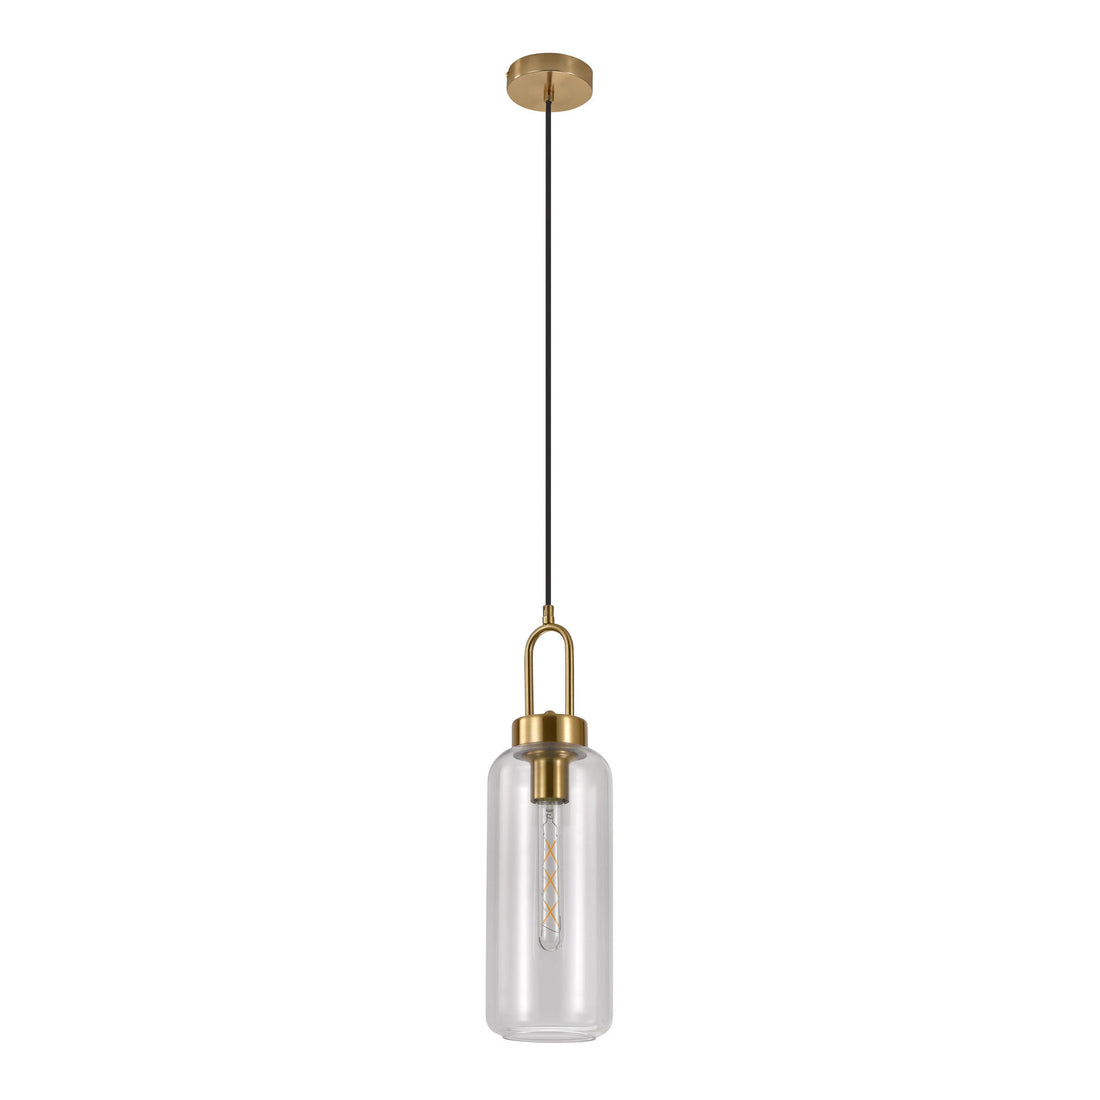 Luton pendant - pendant in cylinder shaped clear glass and brass fitting 150 cm fabric cord bulb: E27/40W - 1 - pcs